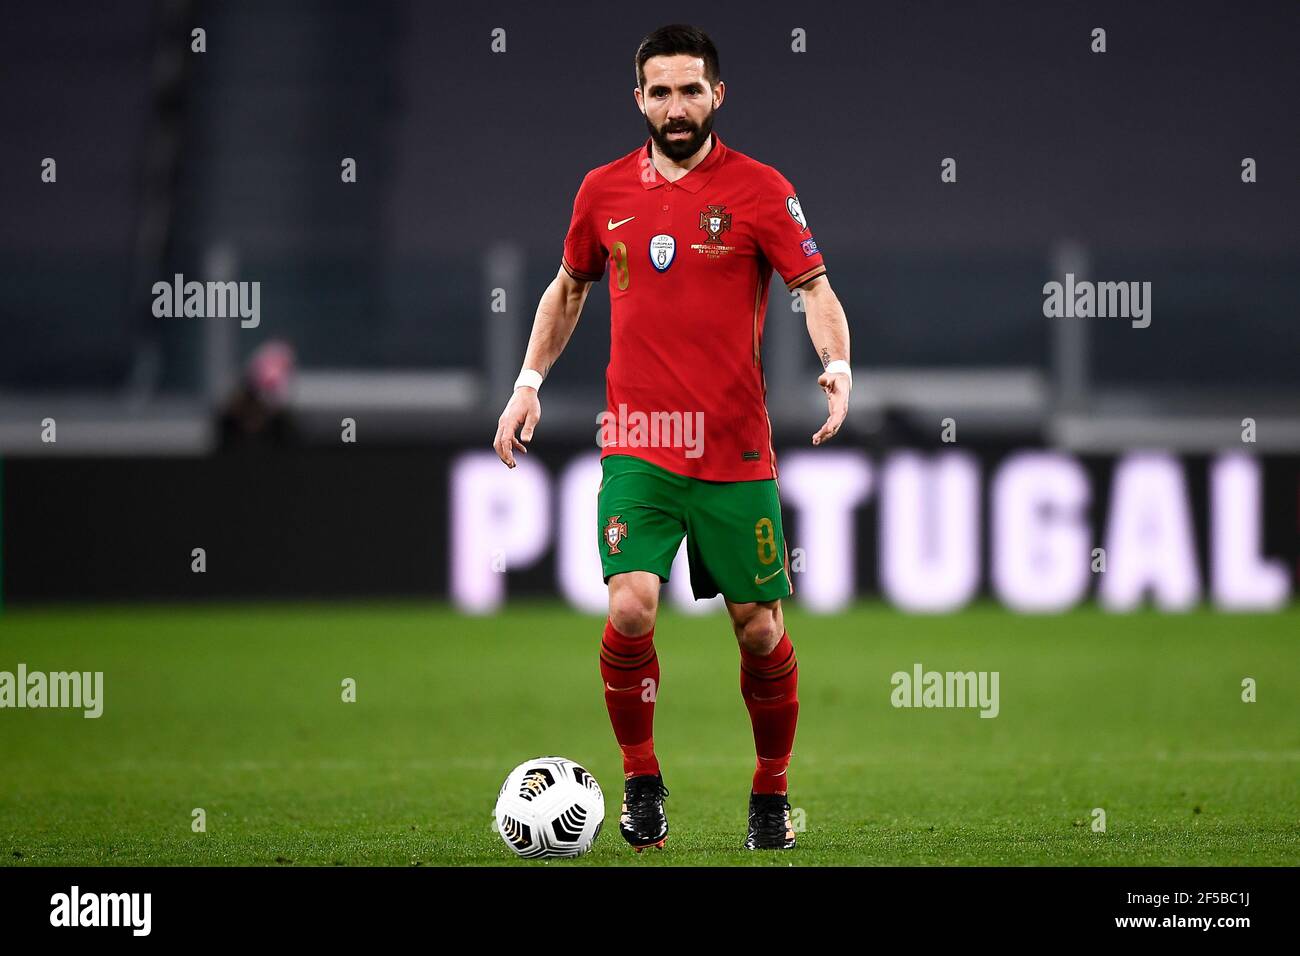 Turin, Italy - 24 March, 2021: Joao Moutinho of Portugal in action during the FIFA World Cup 2022 Qatar qualifying football match between Portugal and Azerbaijan. Portugal face Azerbaijan at a neutral venue in Turin behind closed doors to prevent the spread of Covid-19 variants. Portugal won 1-0 over Azerbaijan. Credit: Nicolò Campo/Alamy Live News Stock Photo